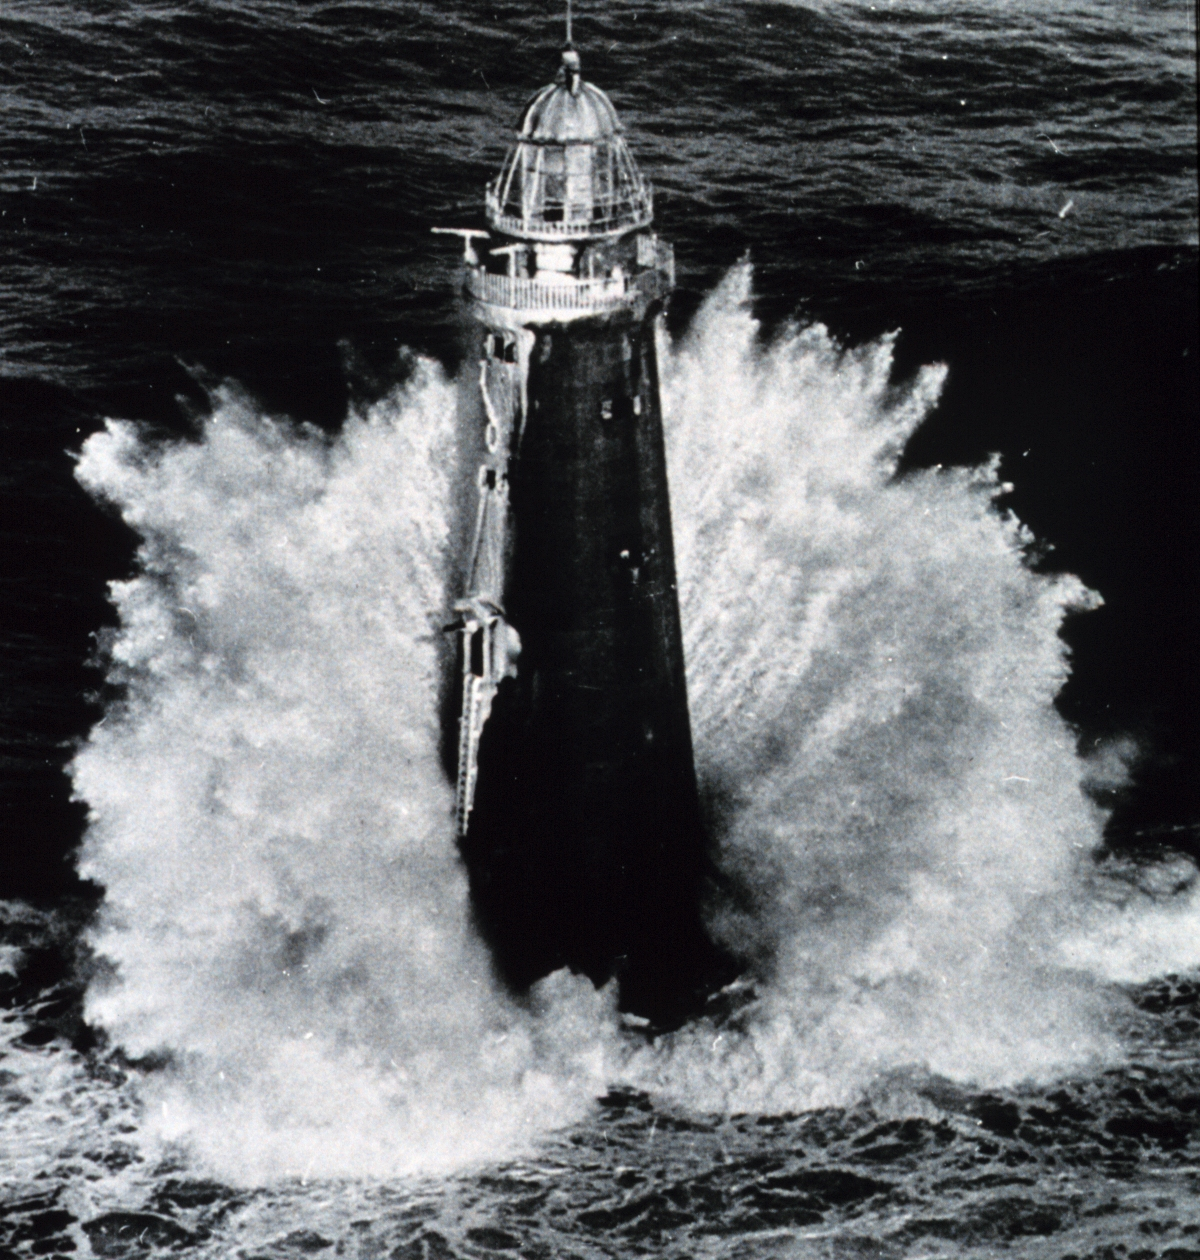 Rough weather for lighthouse keepers